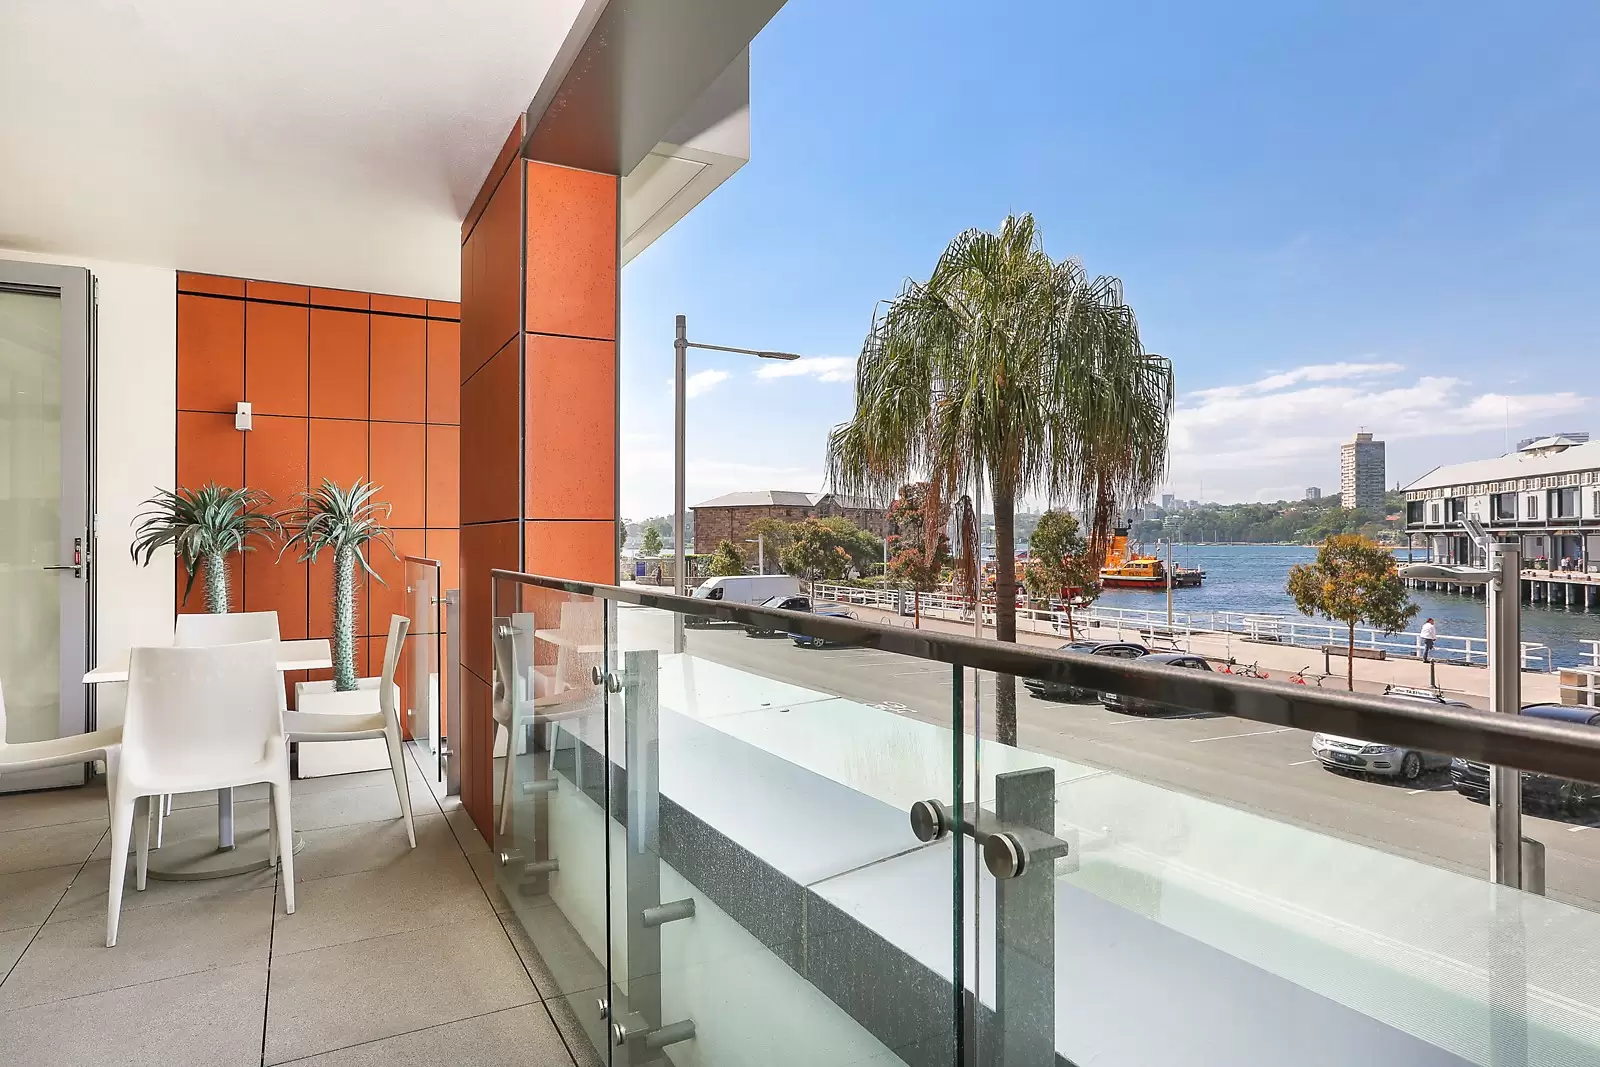 Photo #6: 1/5 Towns Place, Walsh  Bay - Sold by Sydney Sotheby's International Realty